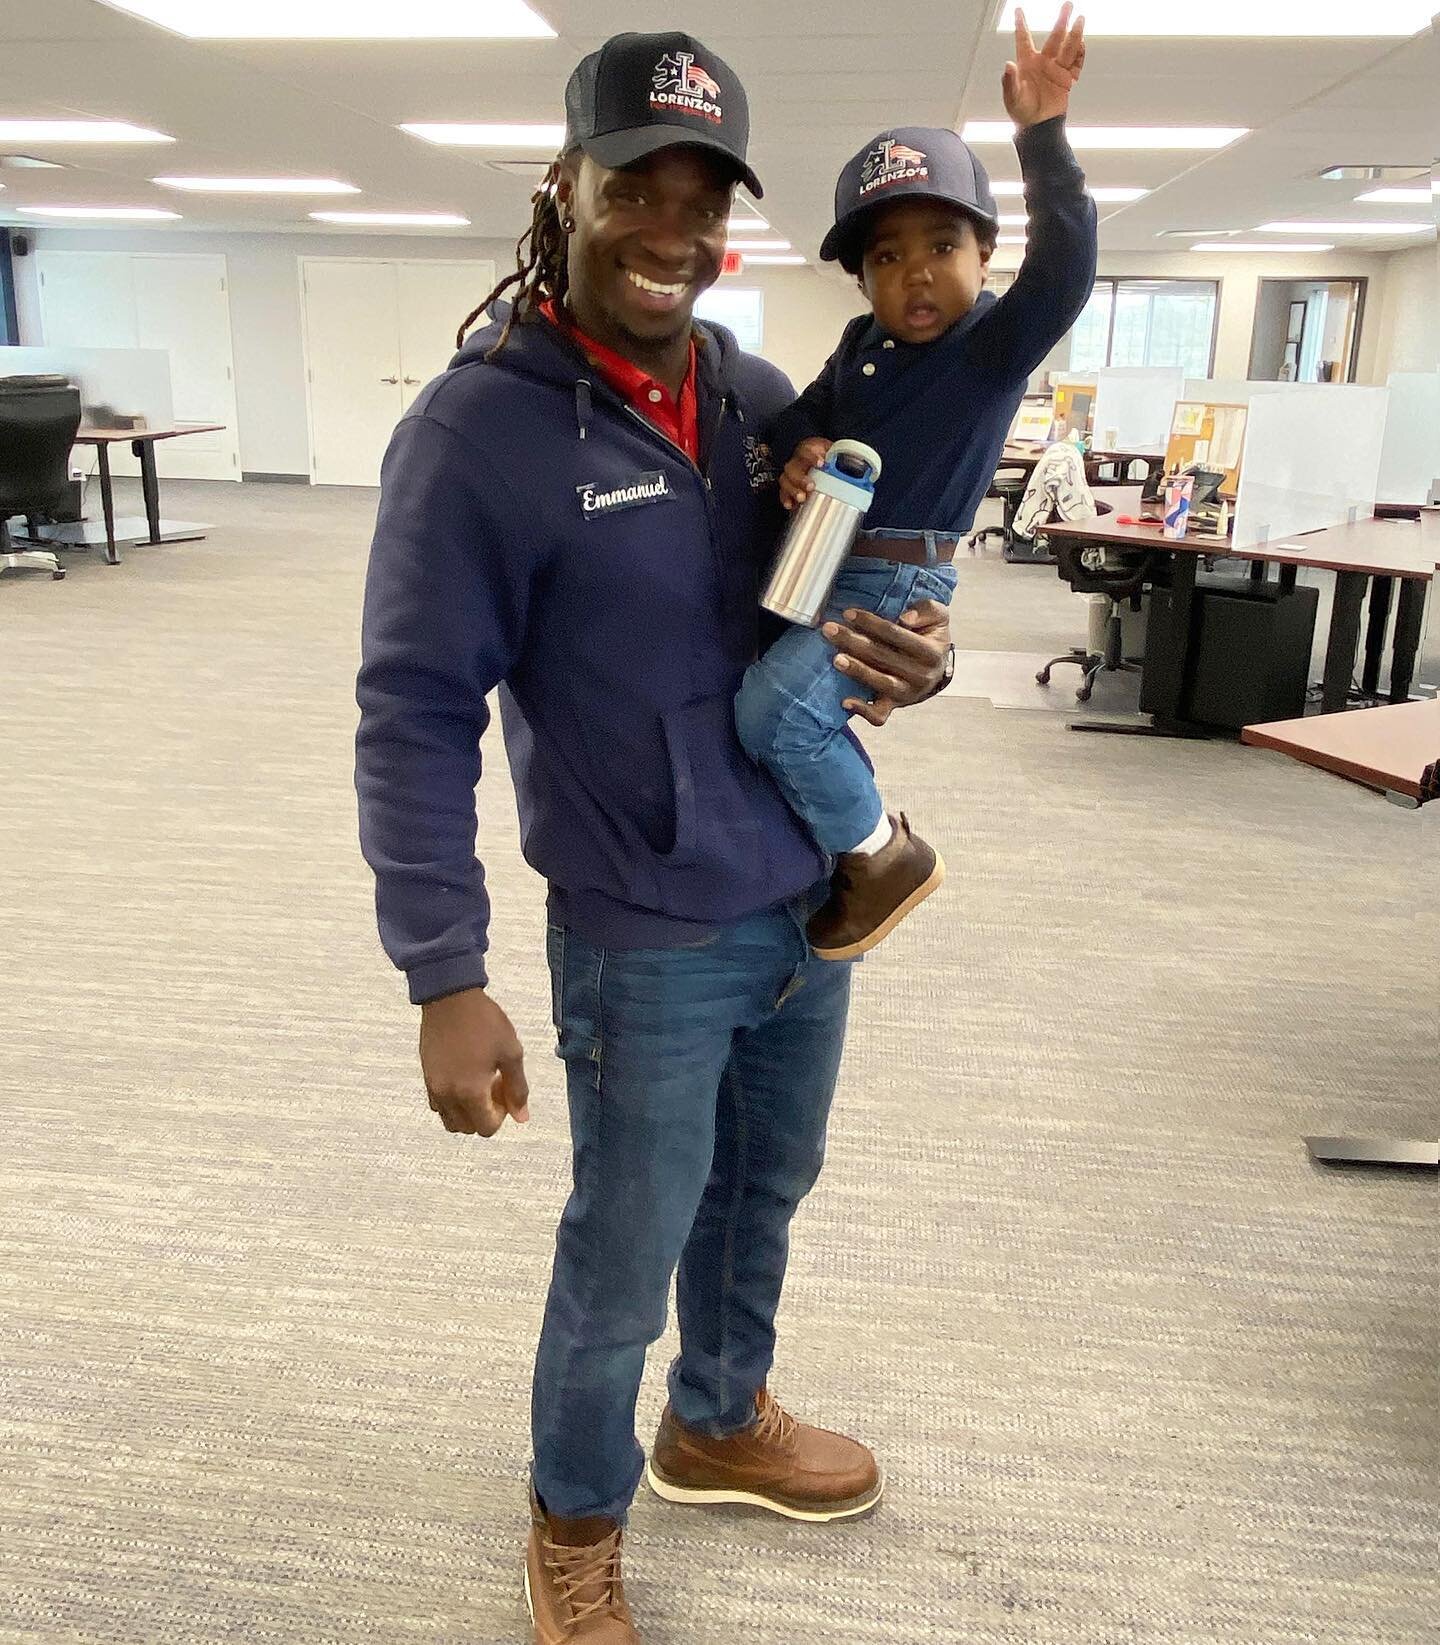 Regional Director, Emmanuel Kangah, stopped by Lorenzo&rsquo;s Dog Training Team&rsquo;s offices to introduce us to his newest professional dog training recruit!#dogtrainer #dogtrainersofinstagram #dogtraining #newrecruit